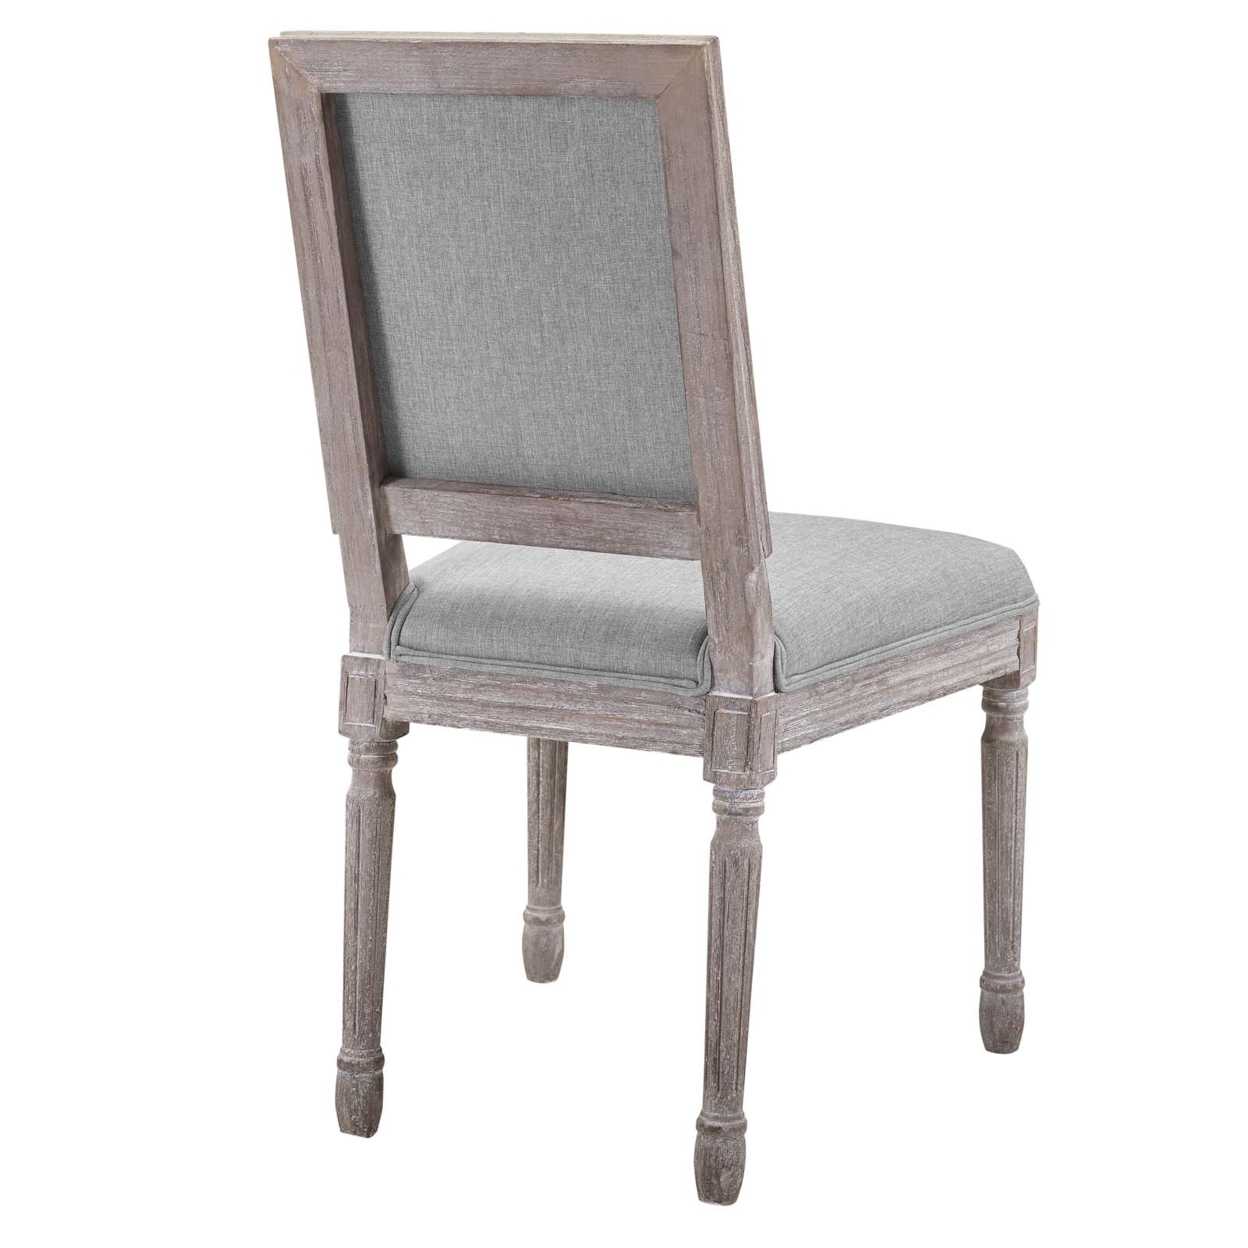 Court Vintage French Upholstered Fabric Dining Side Chair, Light Gray